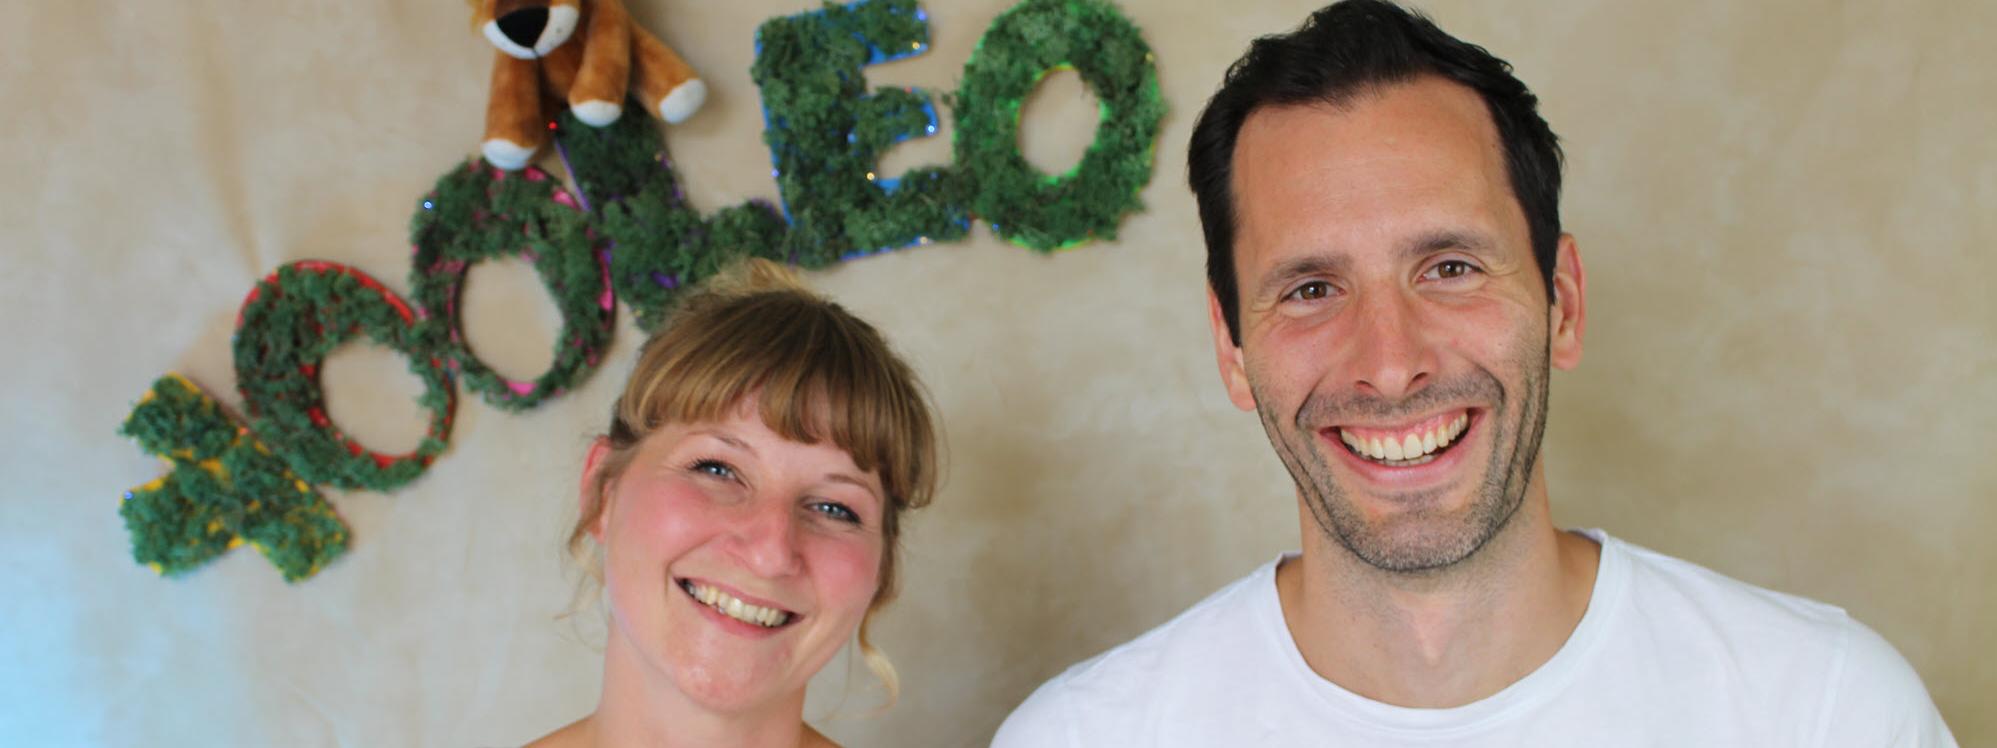 Gianna Stifft and Simon Mayr, the founders of YOOLEO